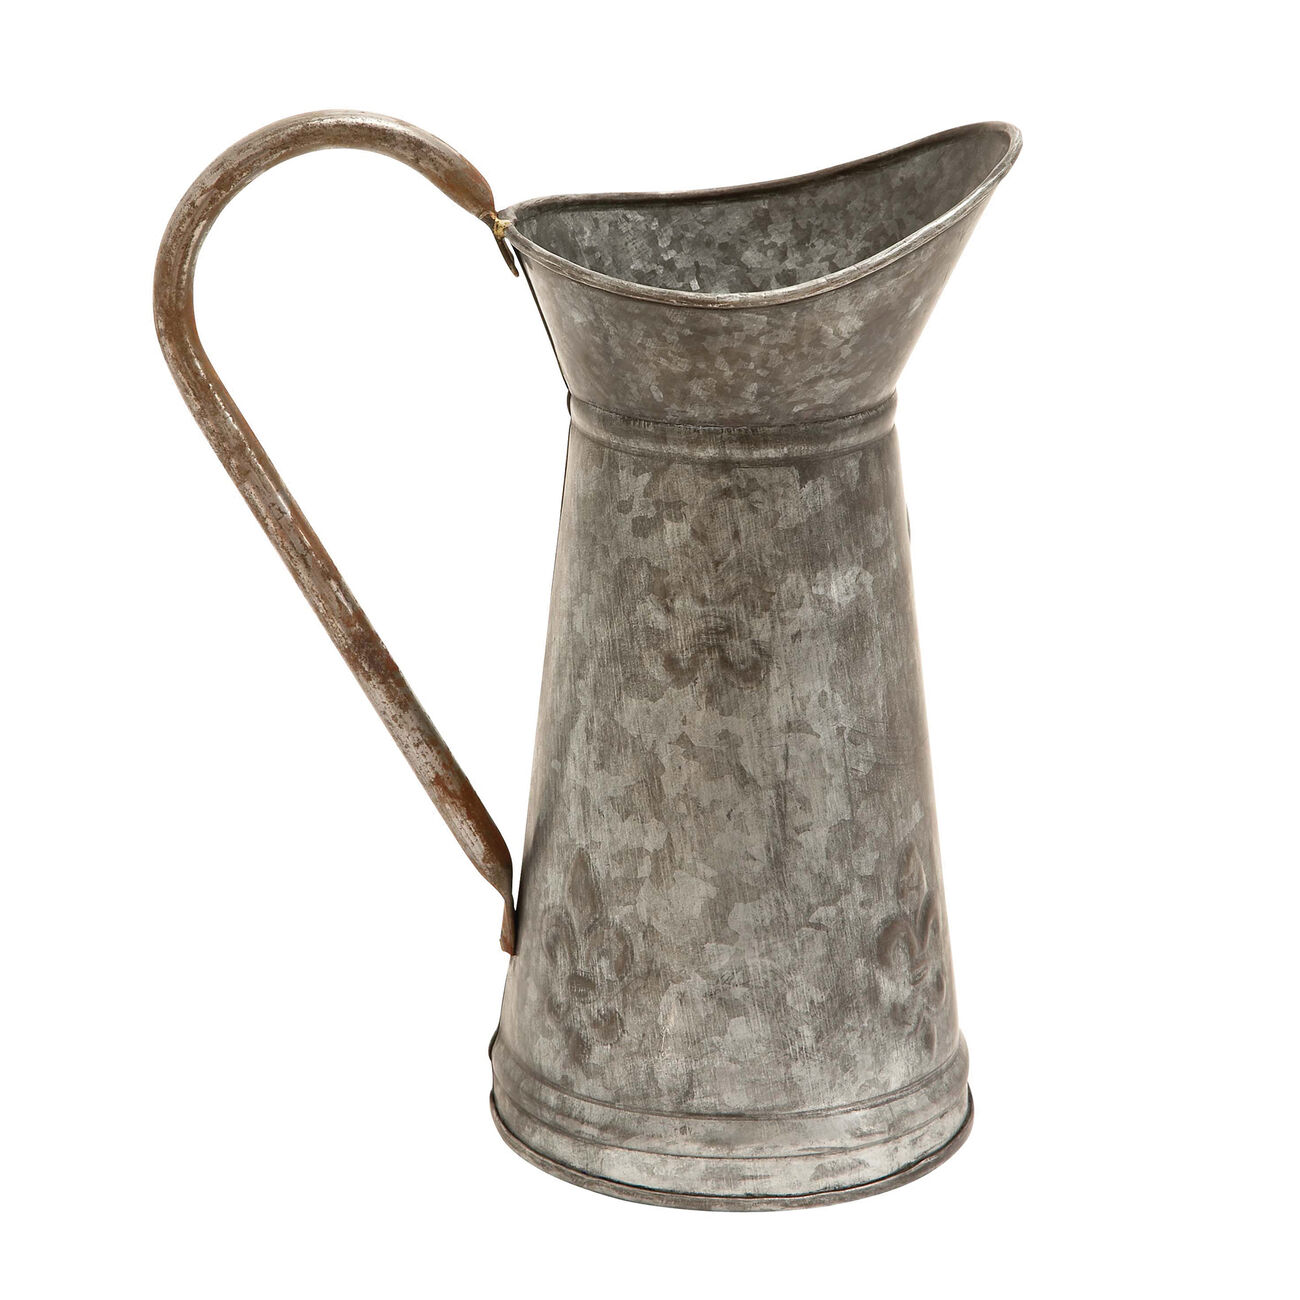 Metal Watering Jug with Curved Handle, Galvanized Gray